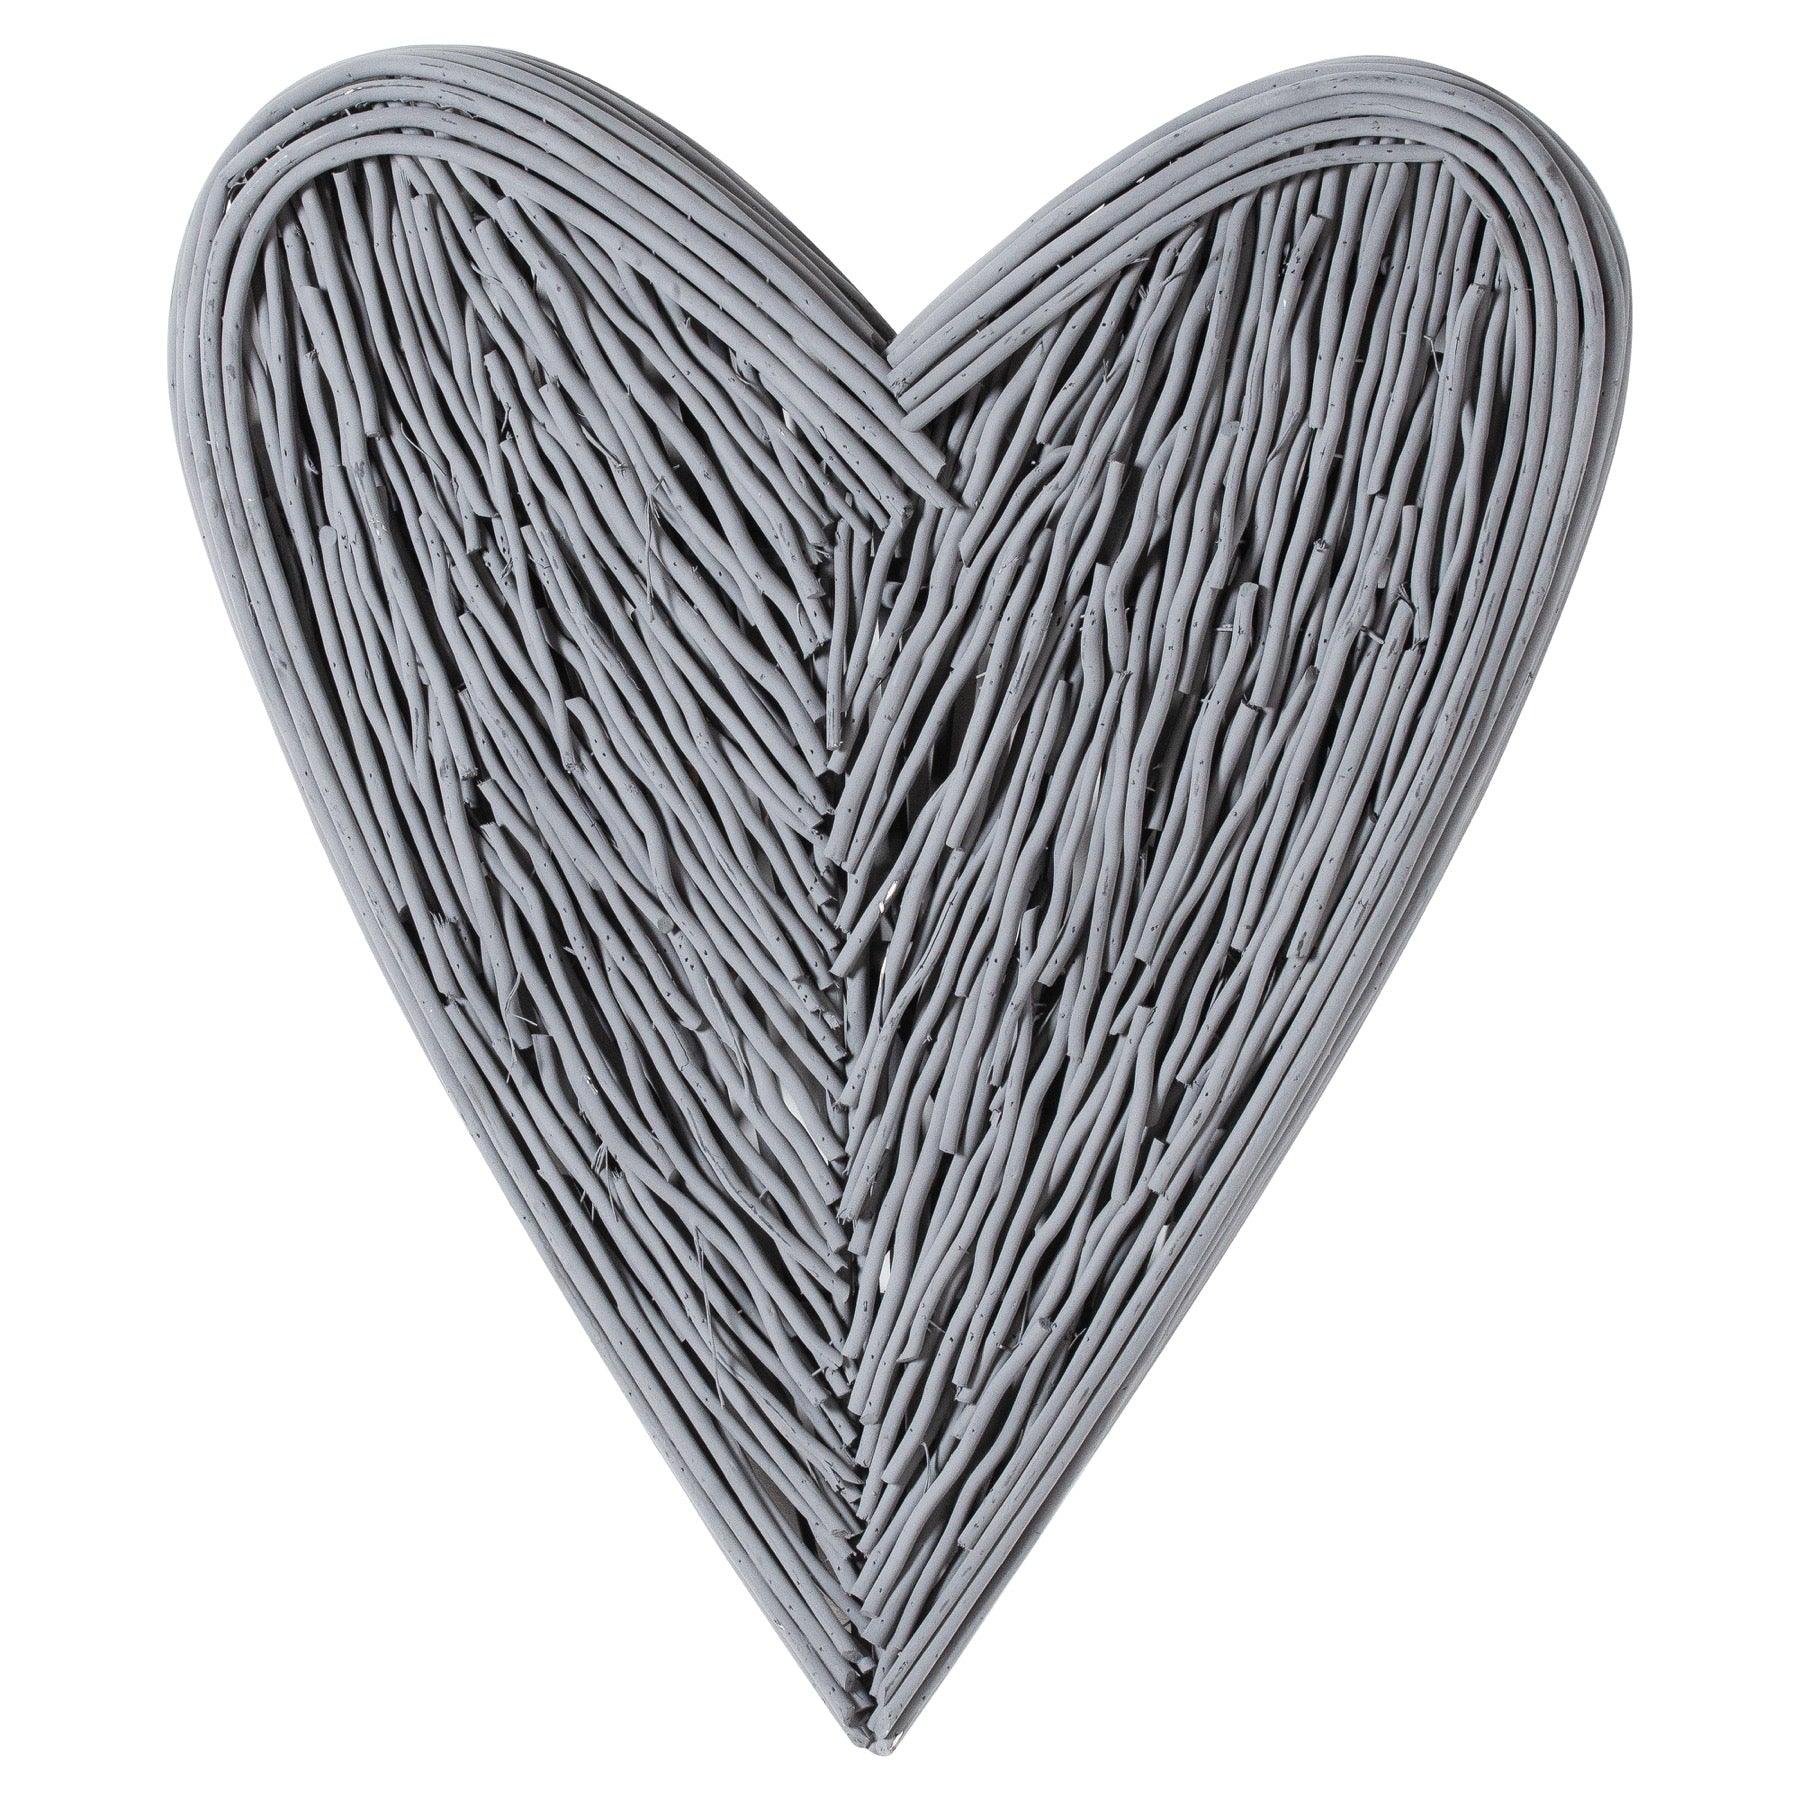 View Grey Willow Branch Heart information